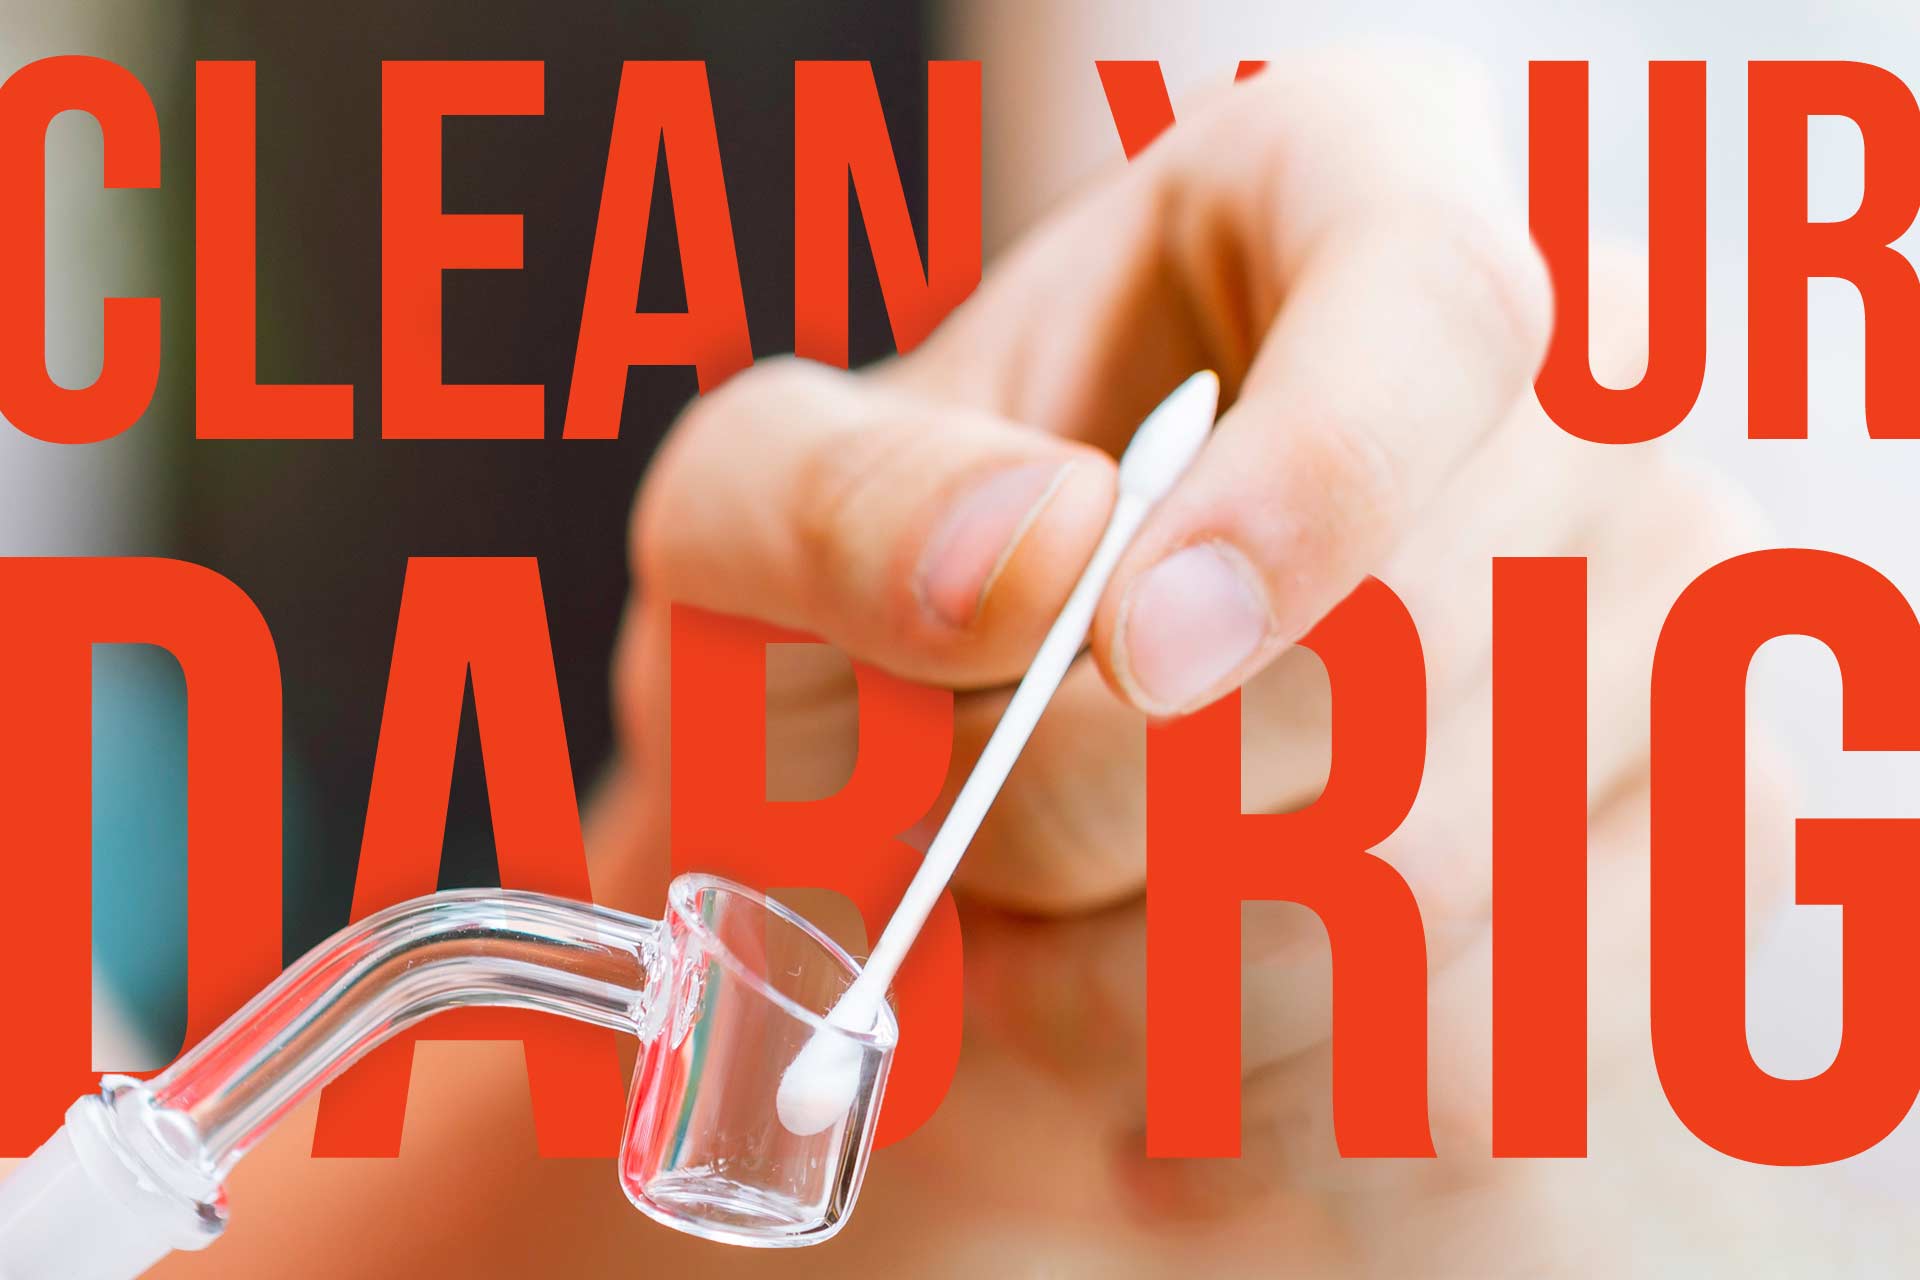 Clean Your Dab Rig: Image of hand holding a q-tip cleaning a Dab rig